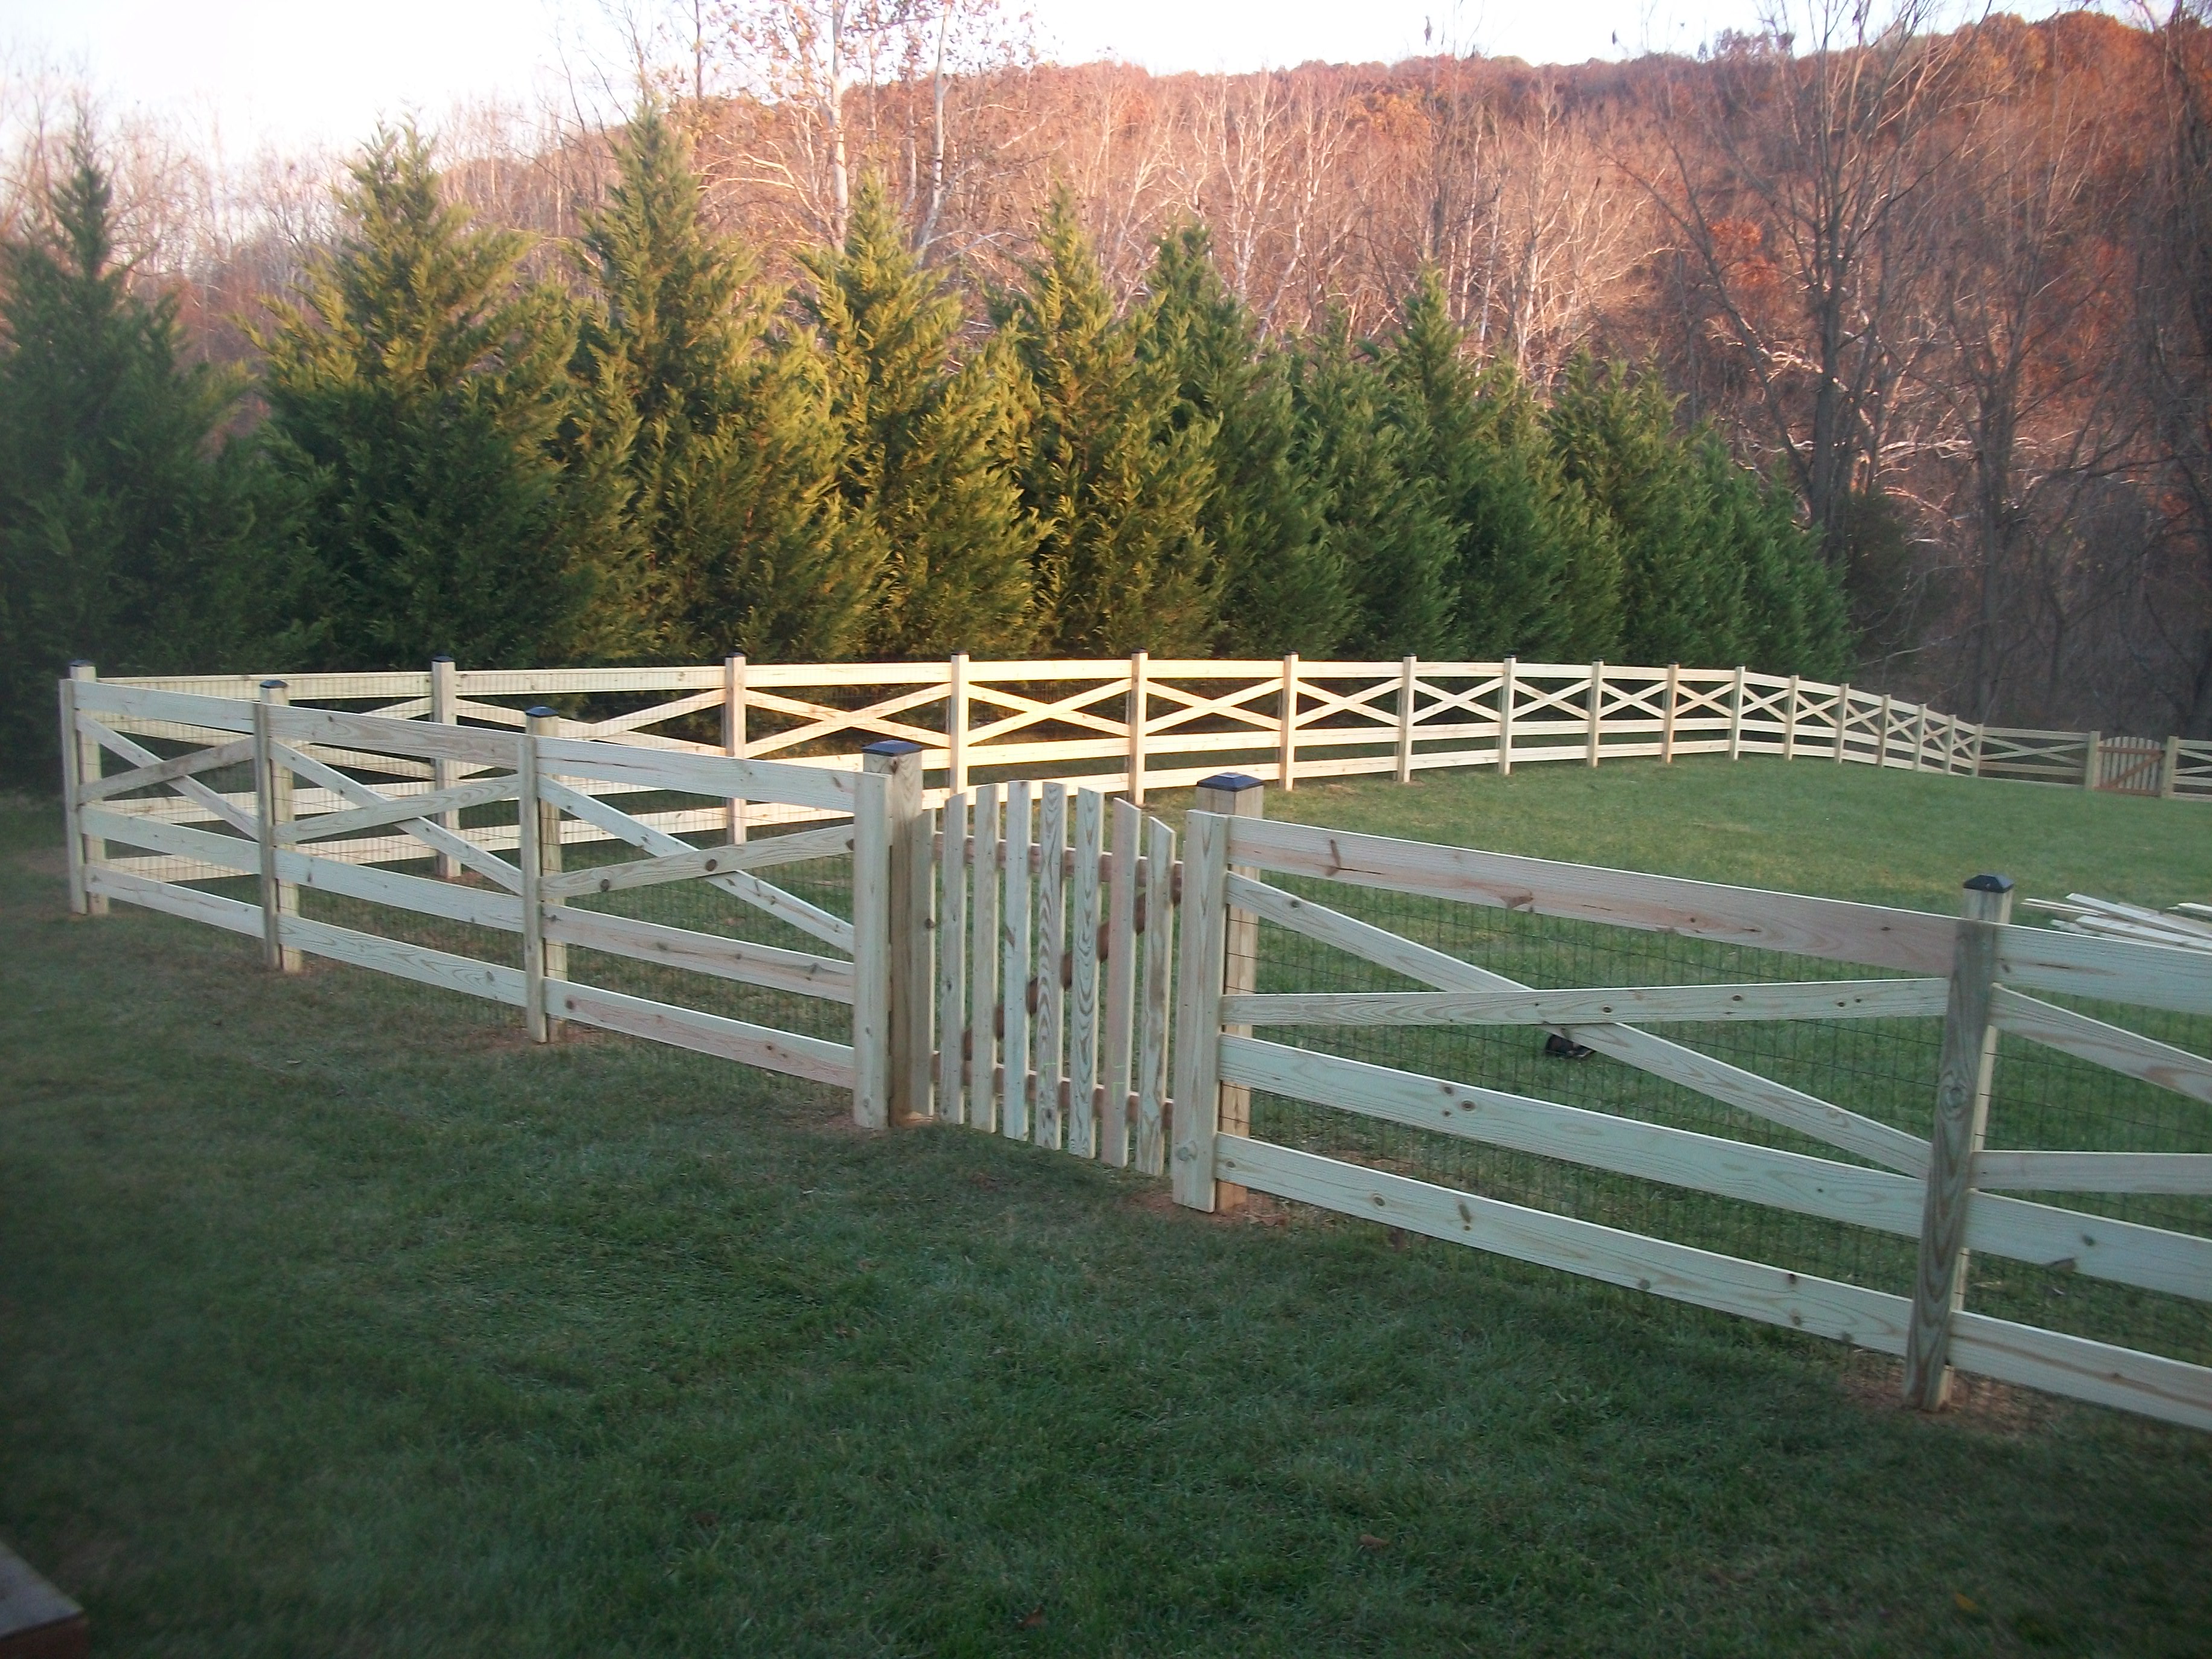 Farm Fencing - Trust the Farm Fence Experts at Tri County